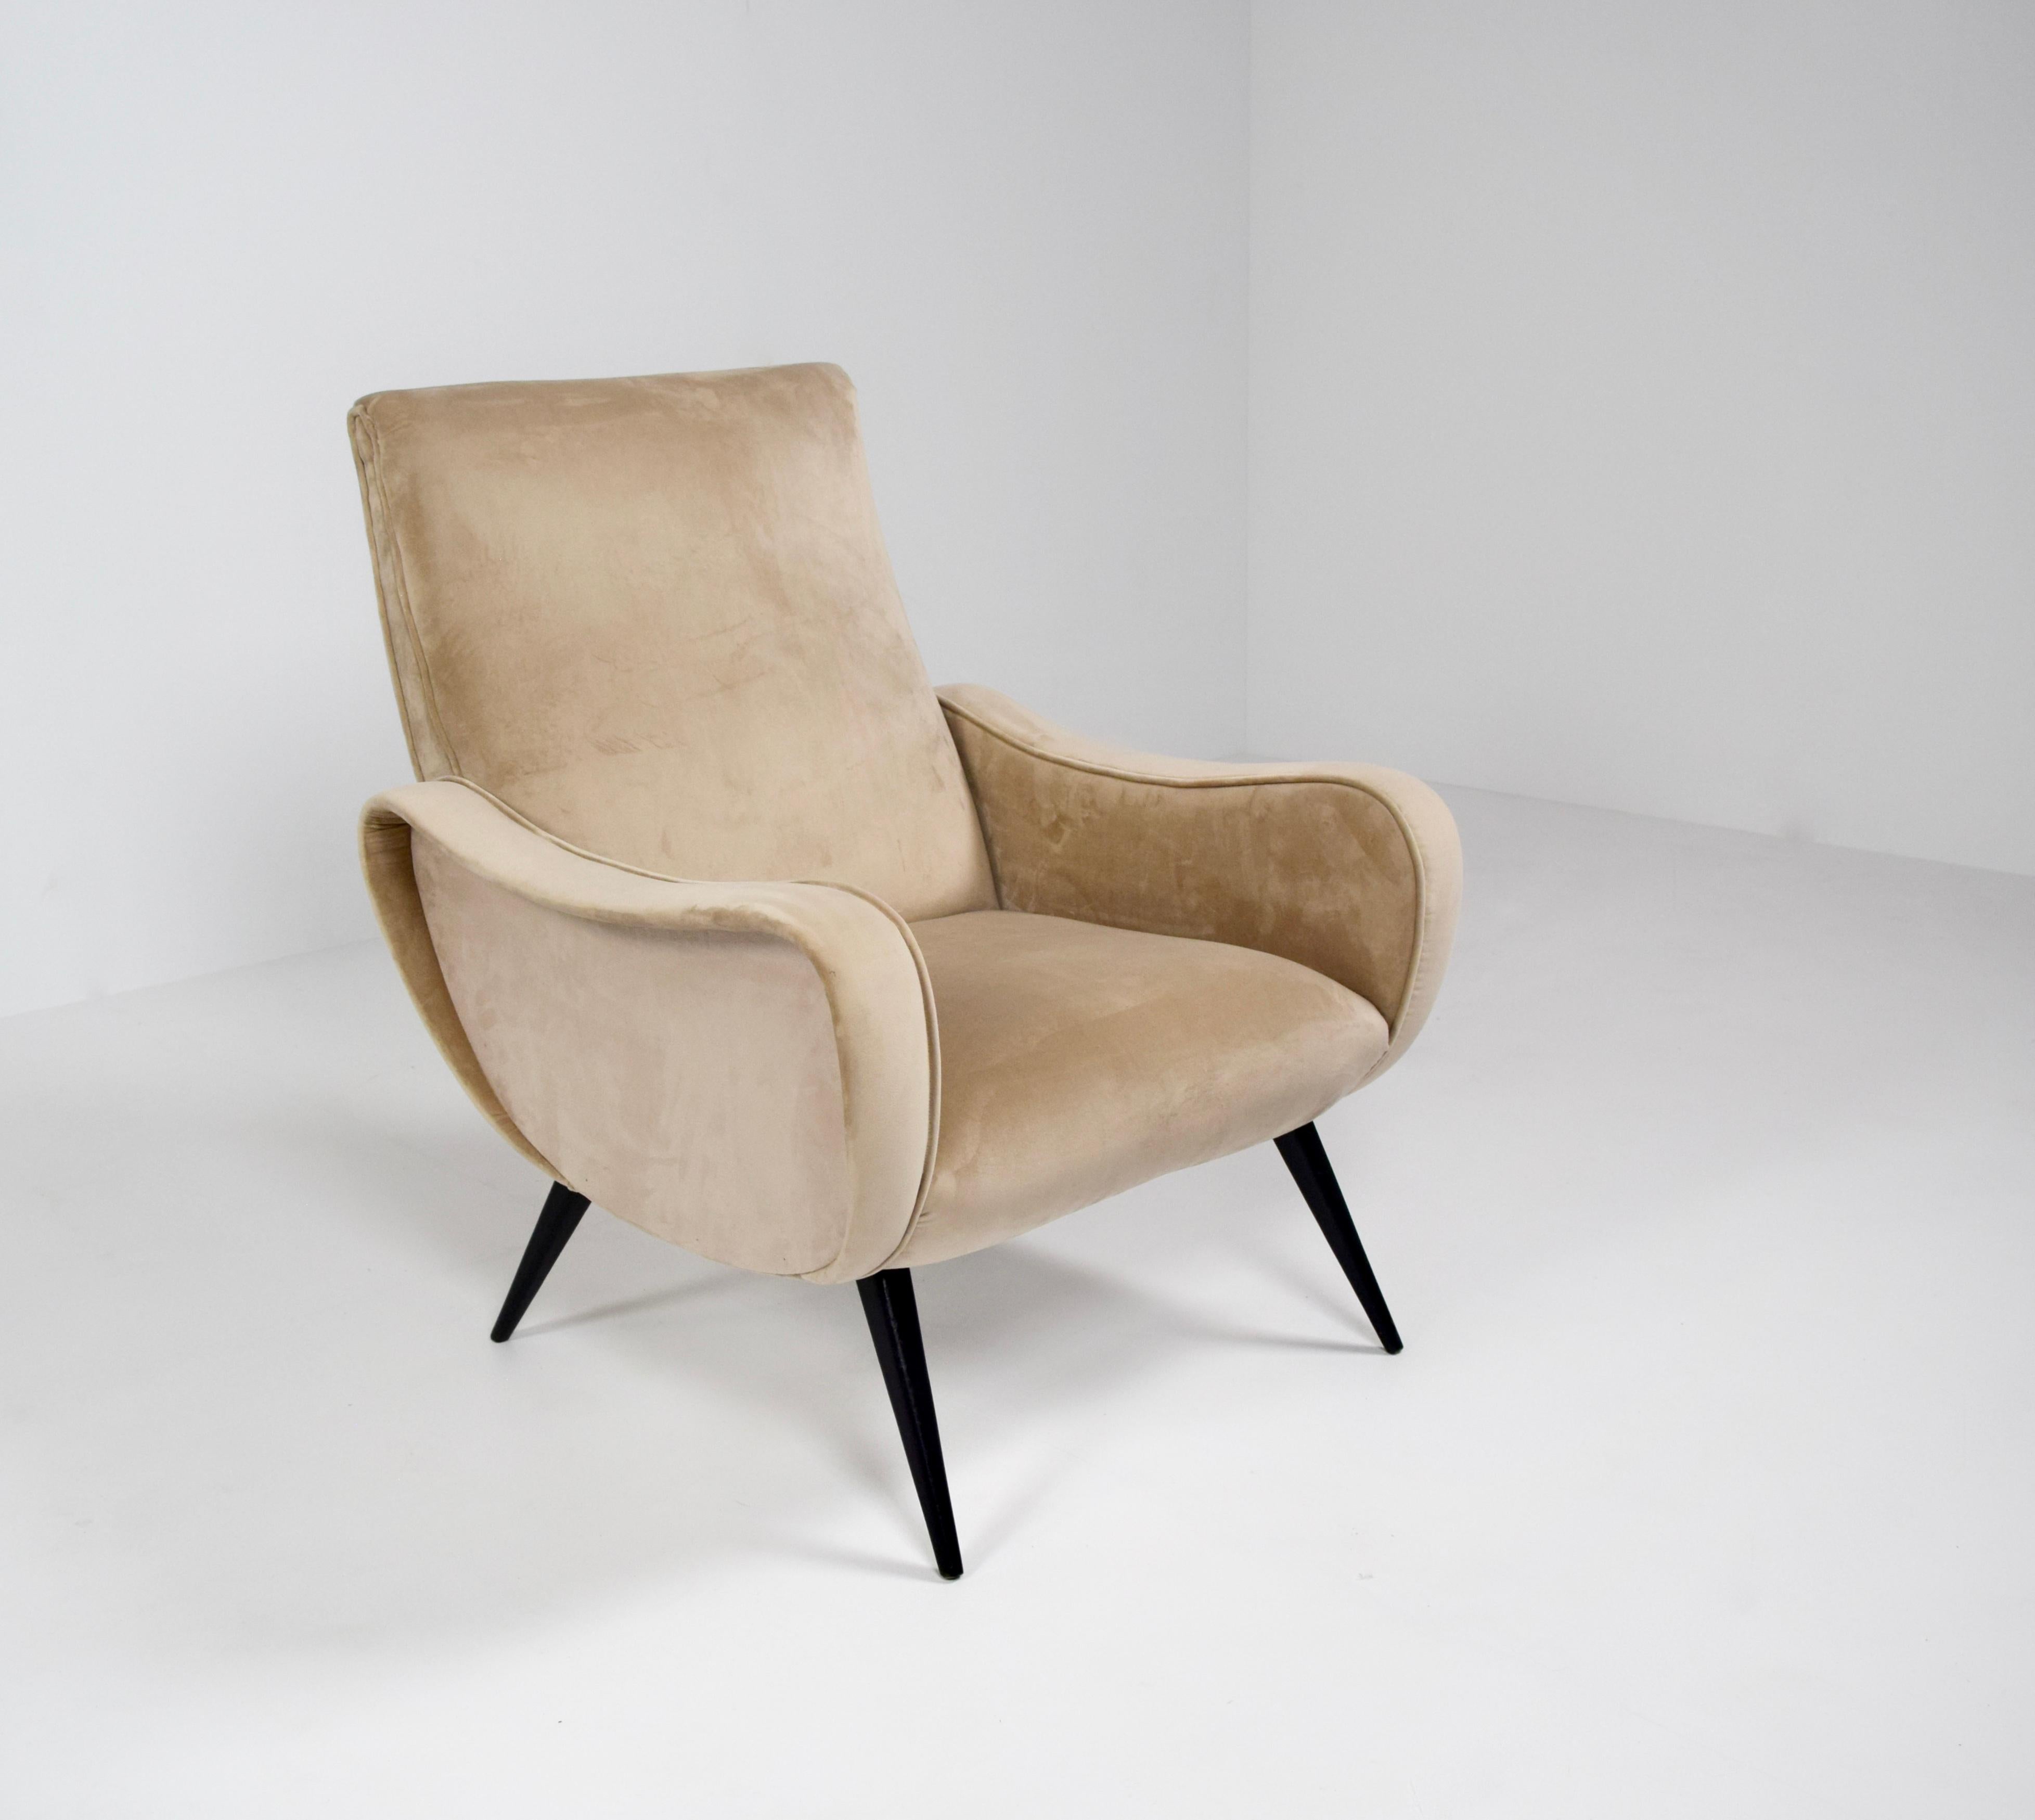 Amazing armchair in Lady Style by Marco Zanuso, Italy 1960s. This chair is very elegant, especially the armrests have a unique shape. The chair is in perfect condition. It is newly upholstered in a beige velvet fabric, which results in a luxurious